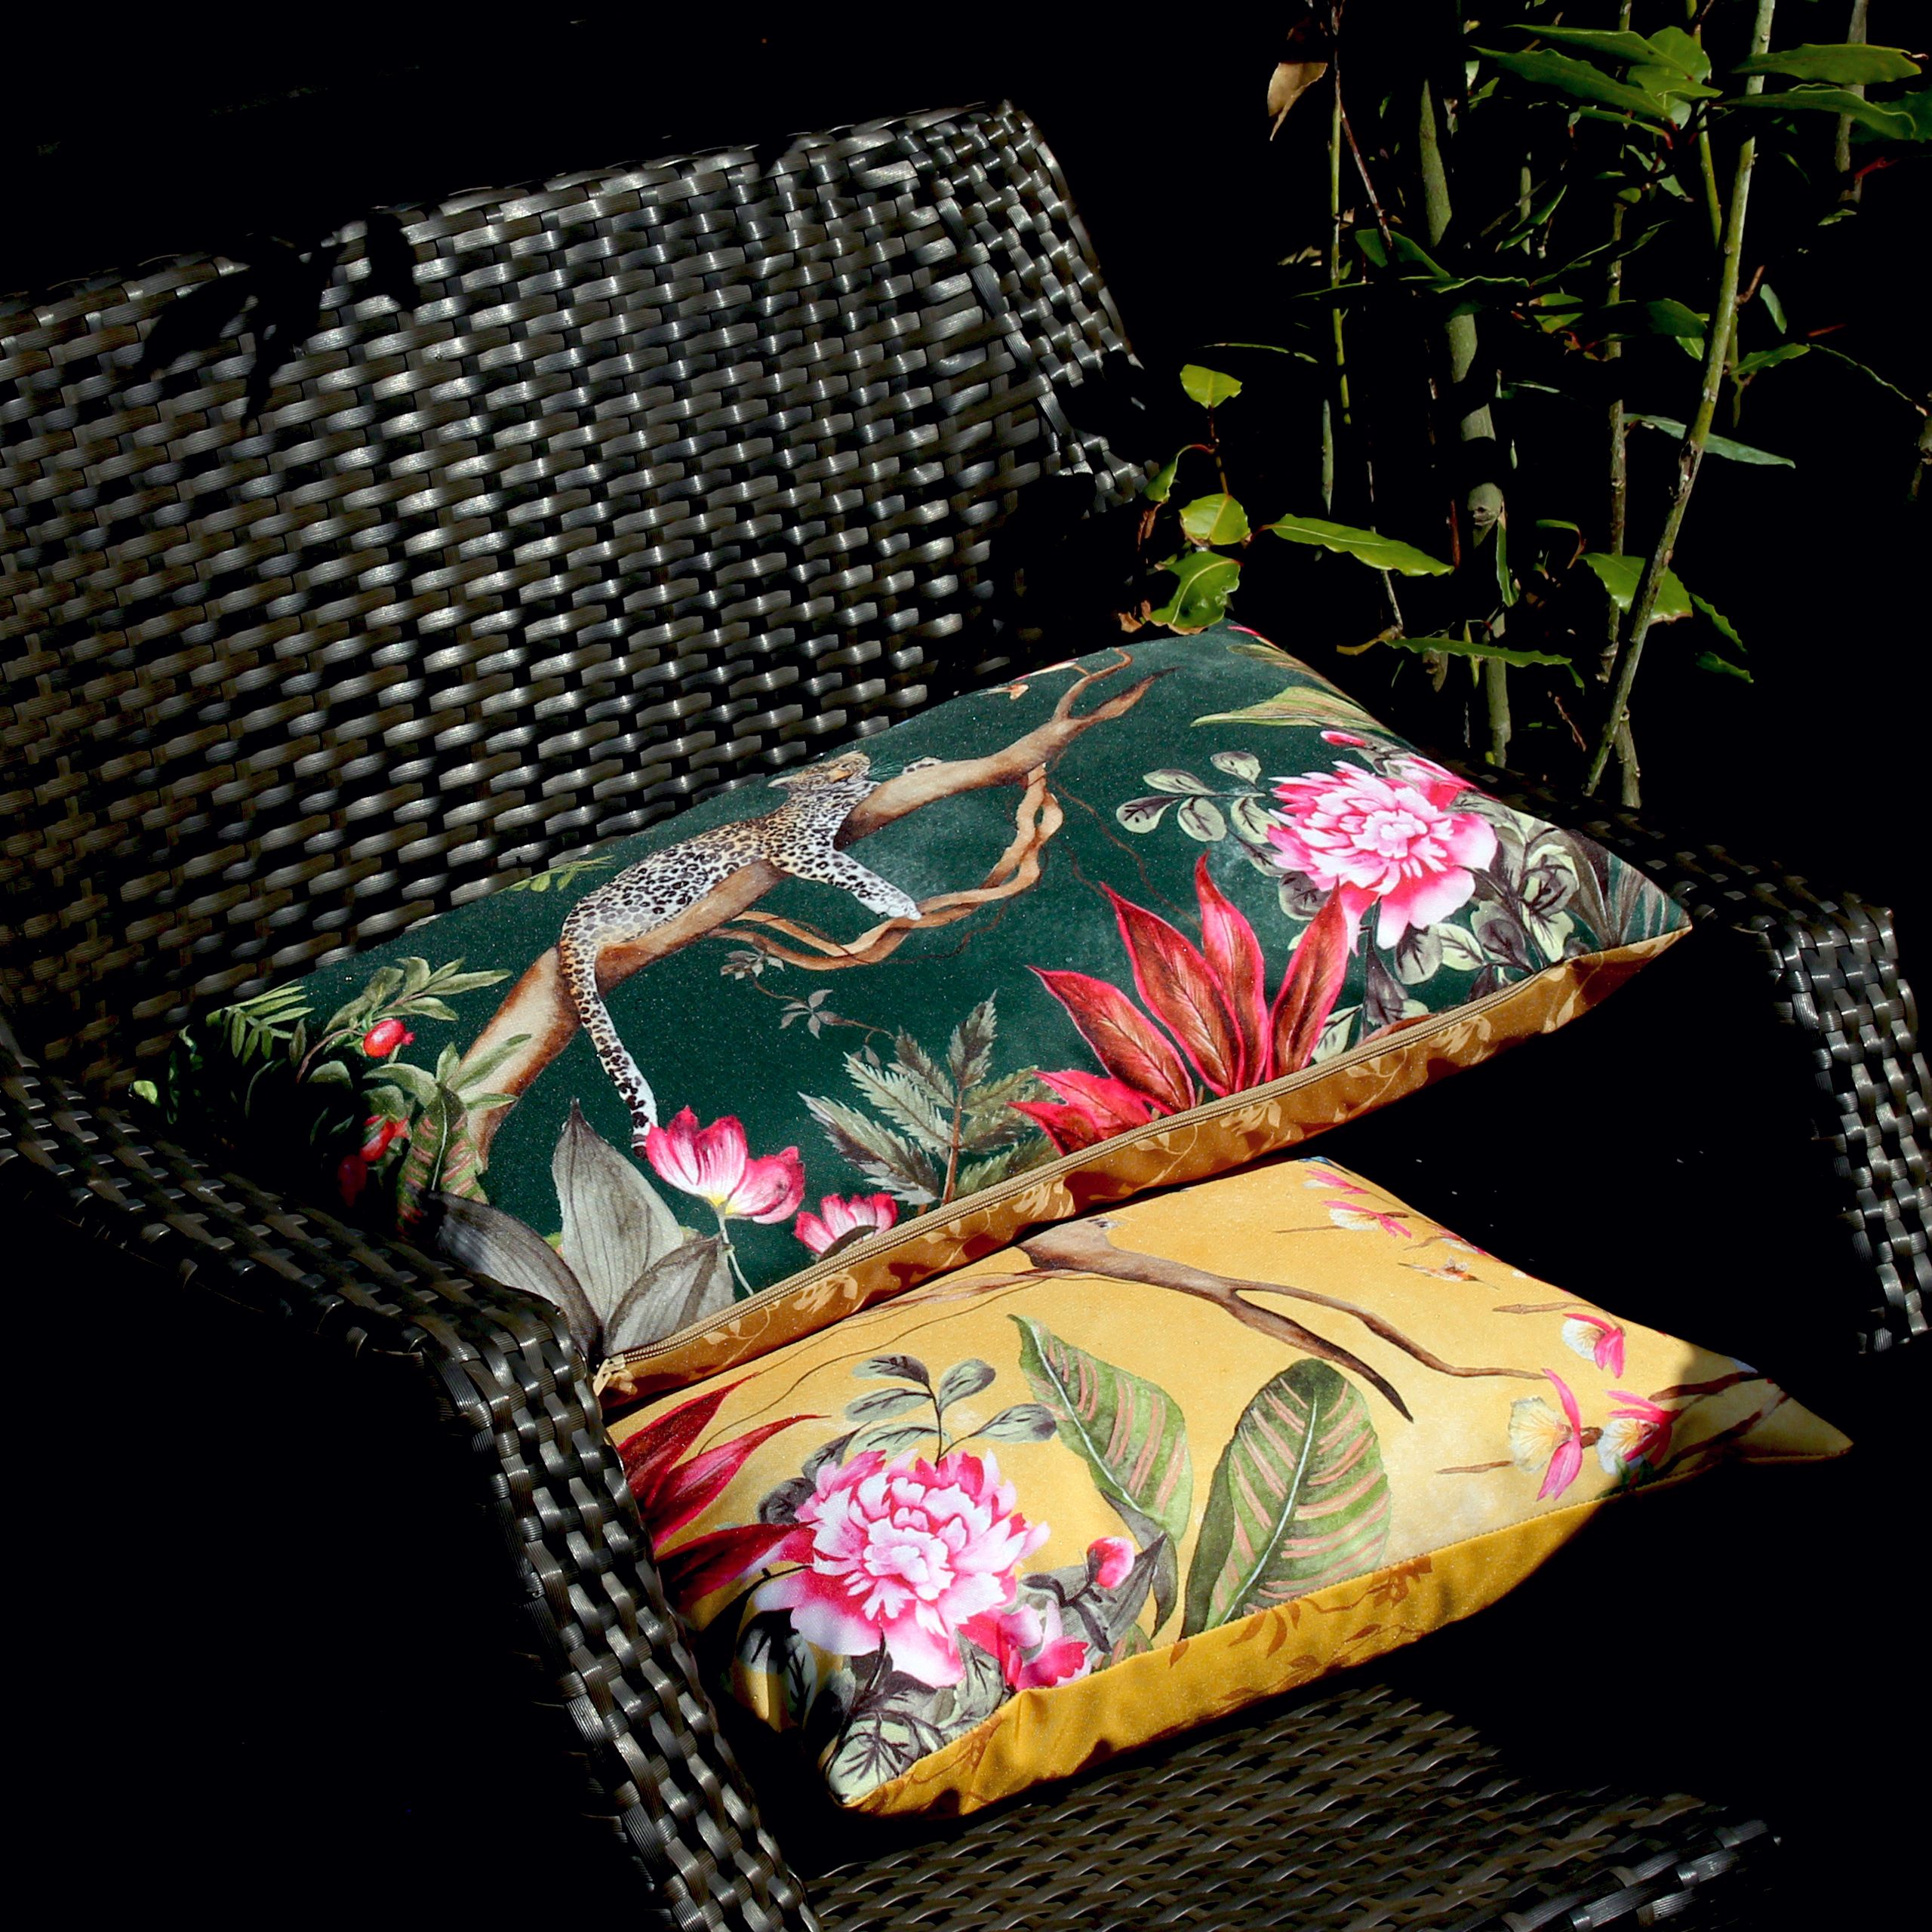 Amongst the tropical foliage, features a striking Leopard printed on a durable water resistant polyester. The Leopard outdoor cushion is the perfect addition to your garden.